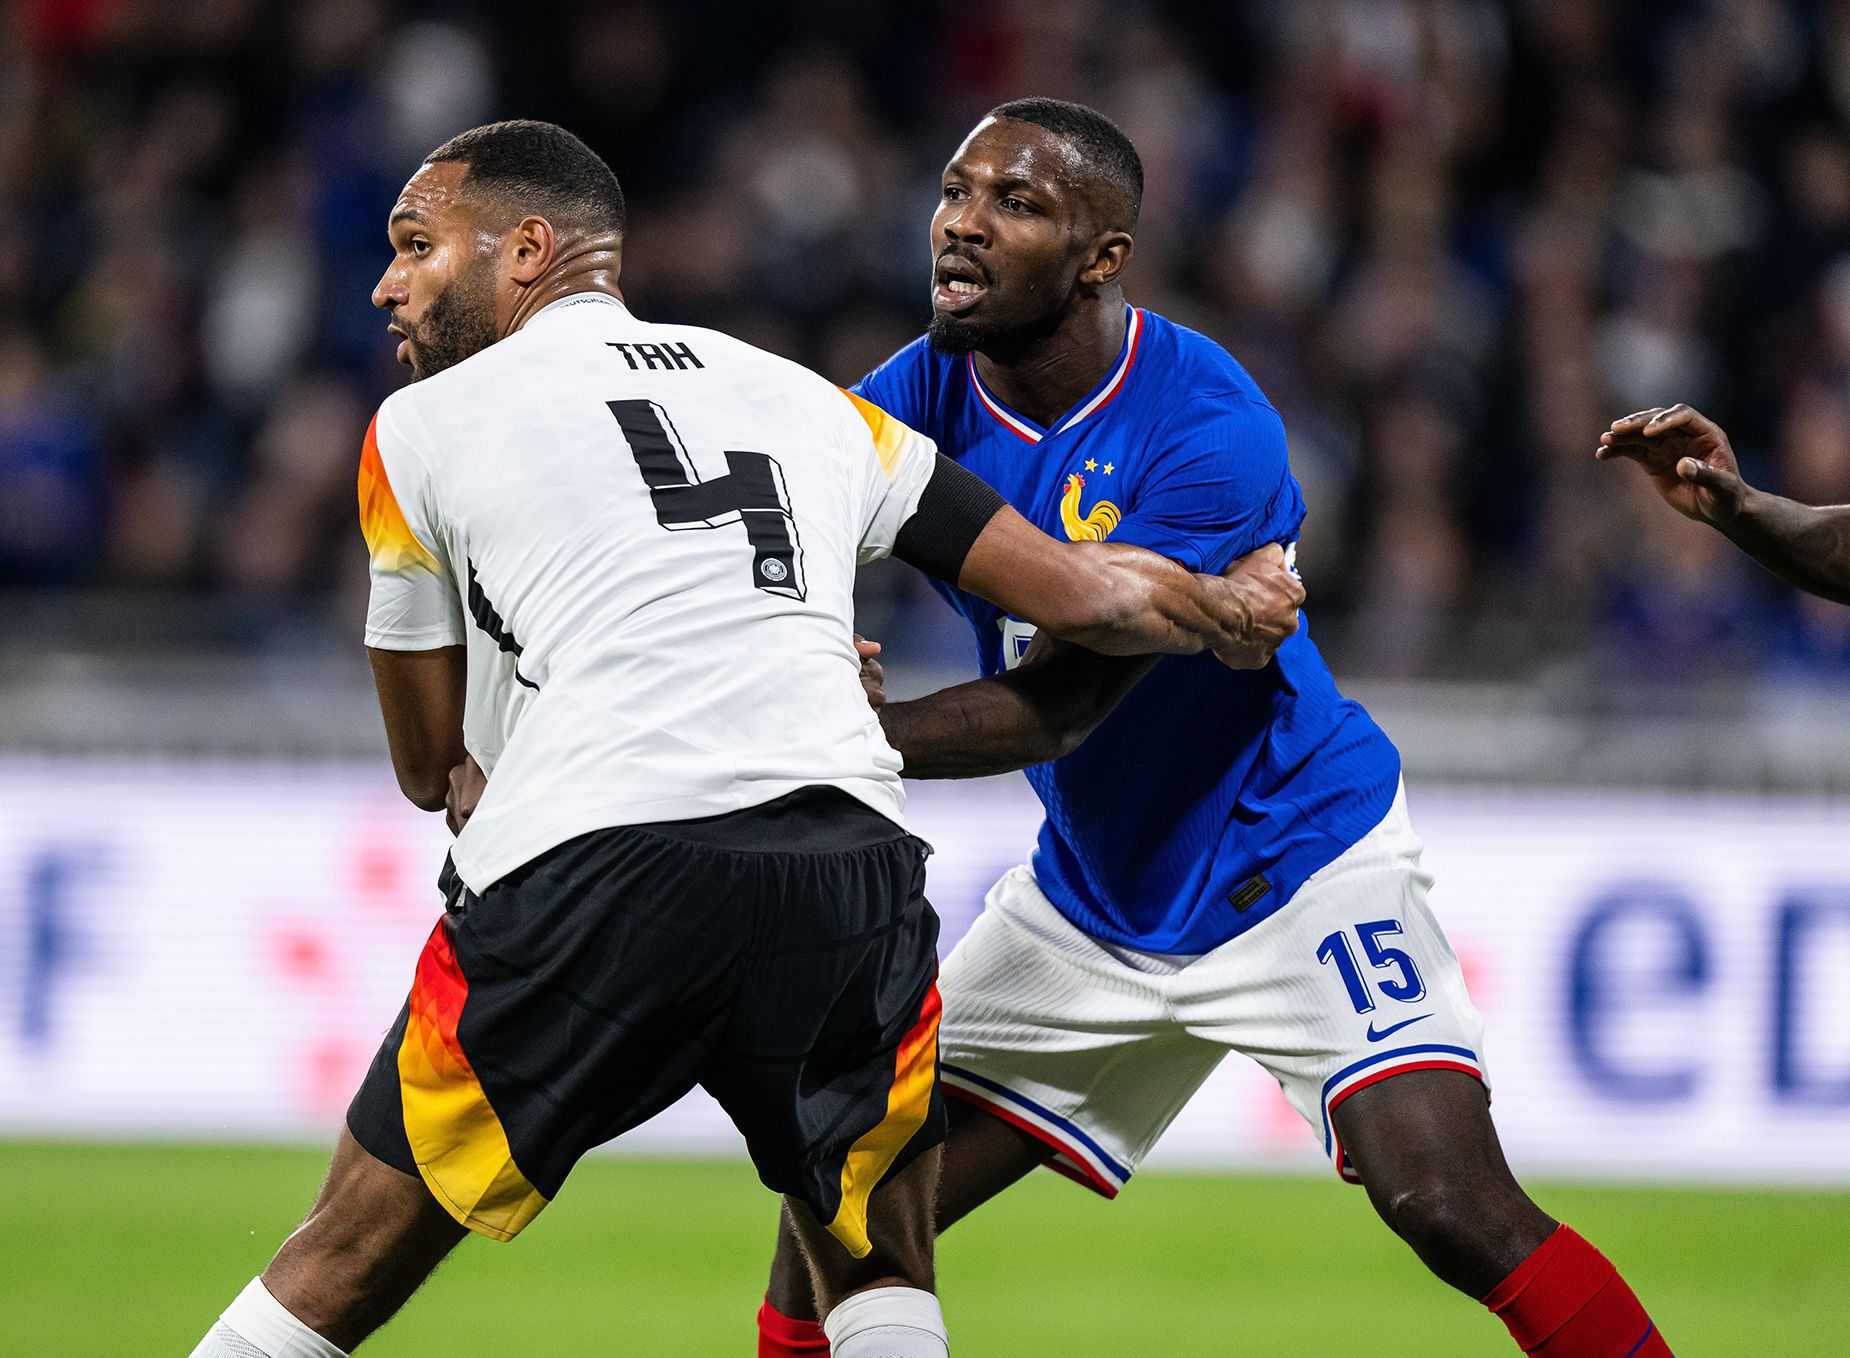 Jonathan Tah, who plays for Germany, is seen in the jersey during a friendly match with France in March.